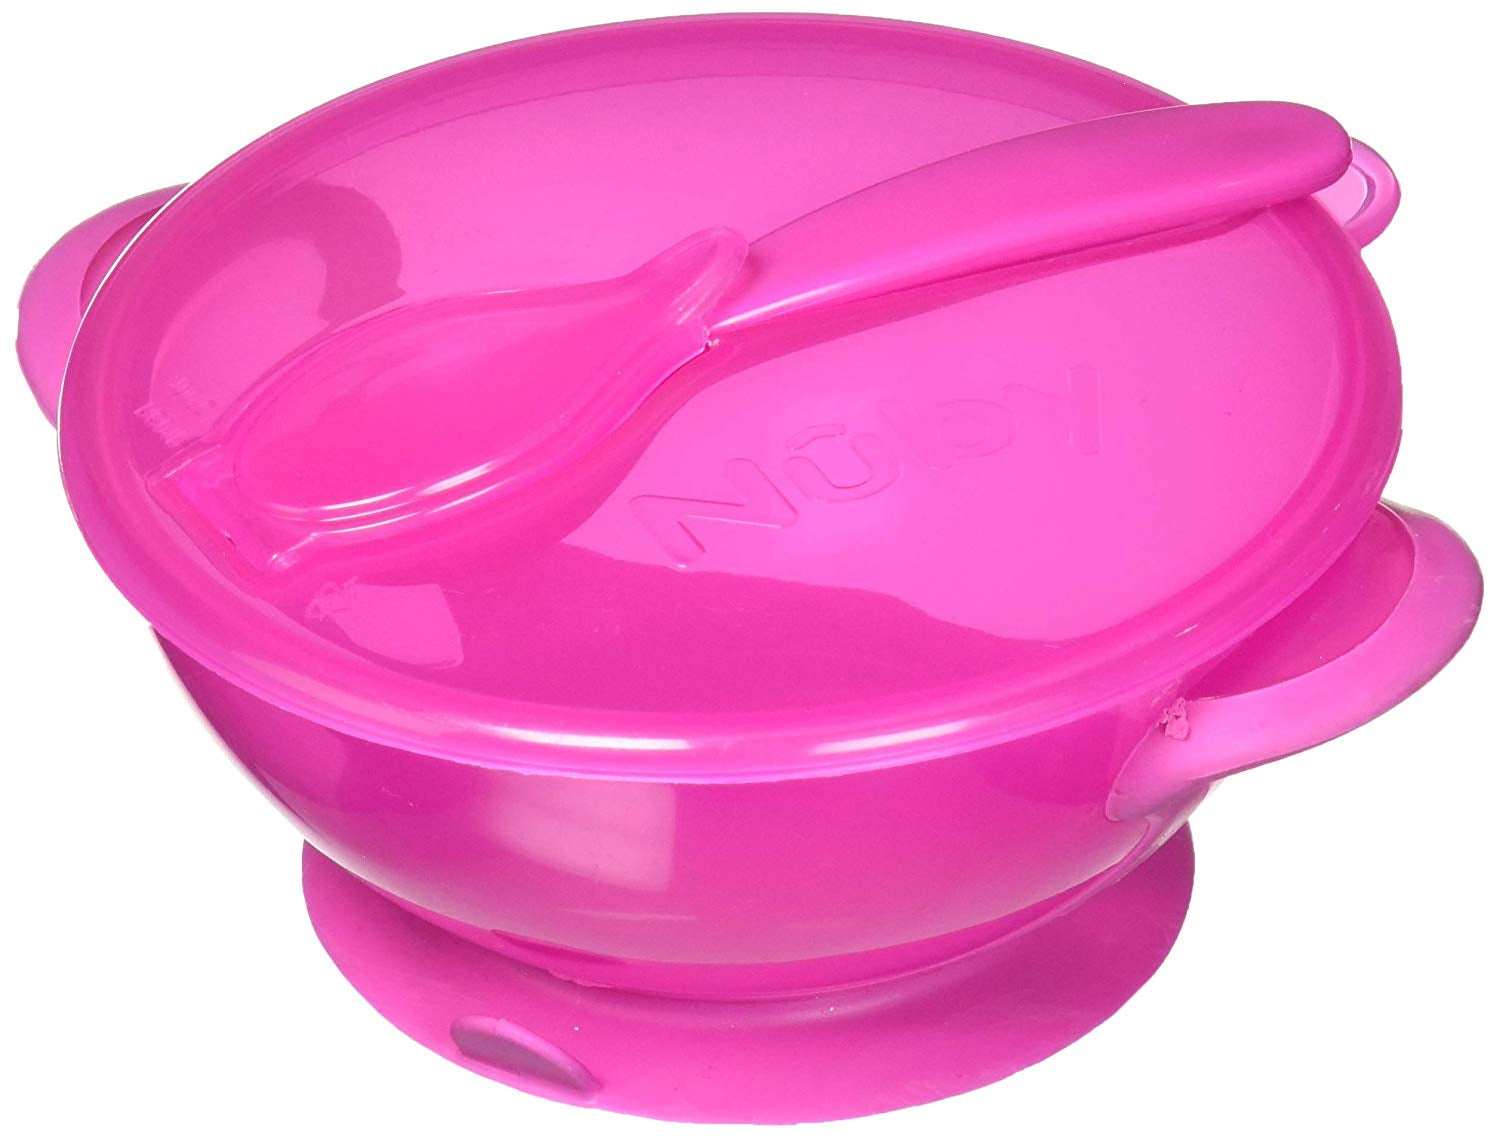 Nuby Suction Bowl with Spoon and Lid